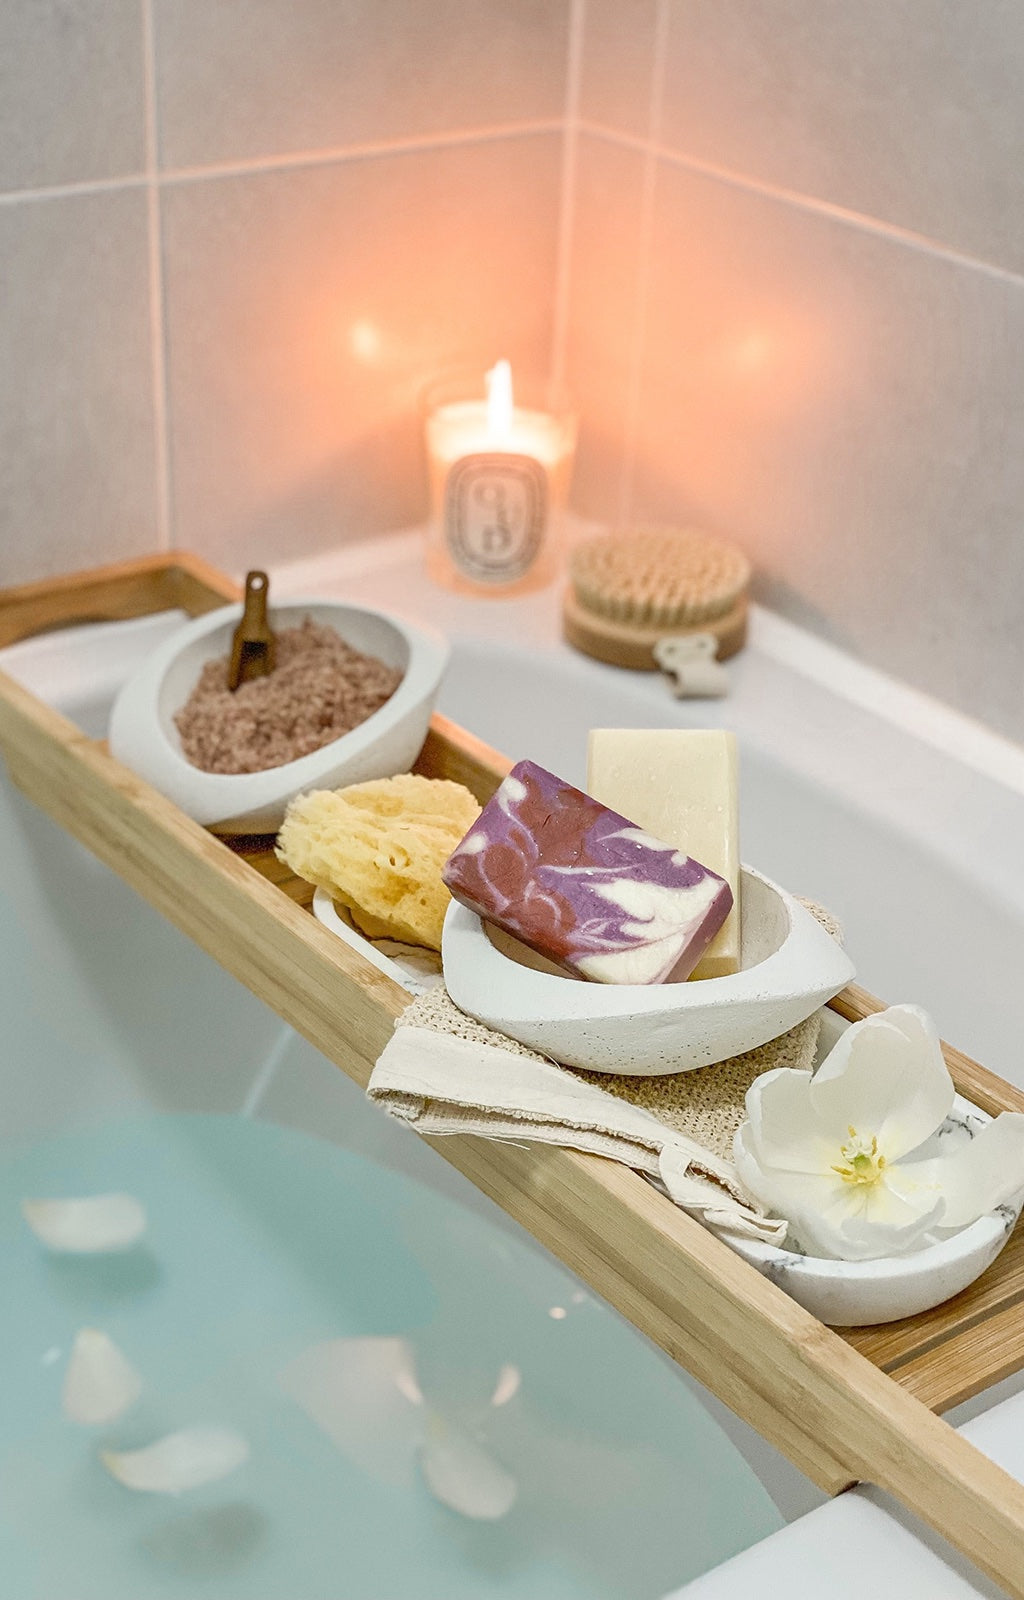 Image of bars of soap on a wooden table above a bath tub.